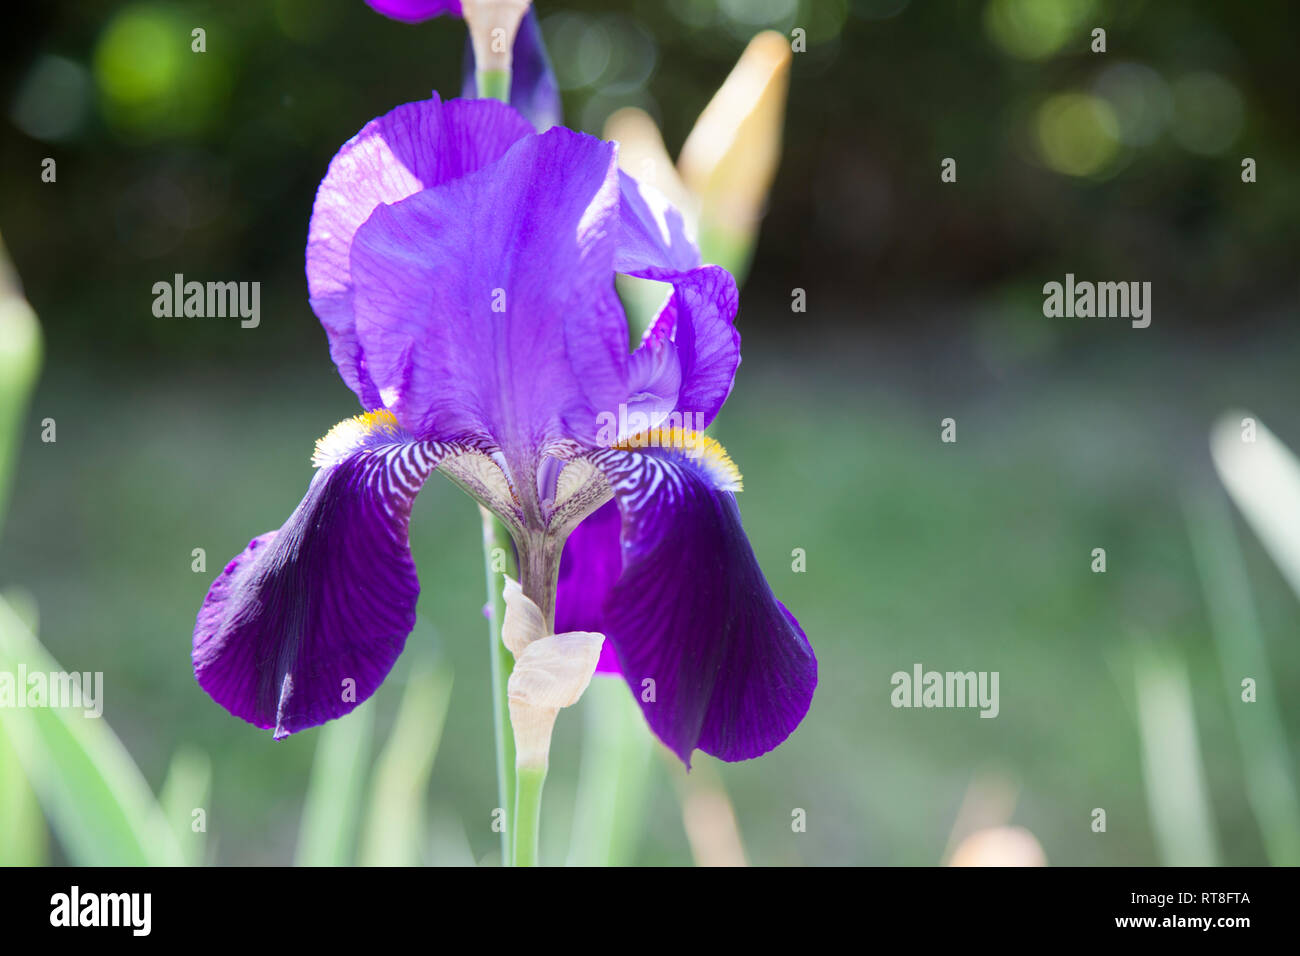 Japanese Water Iris in a pond, purple flowers on the long green stems in full bloom in the English summertime, close up image with no people. Stock Photo